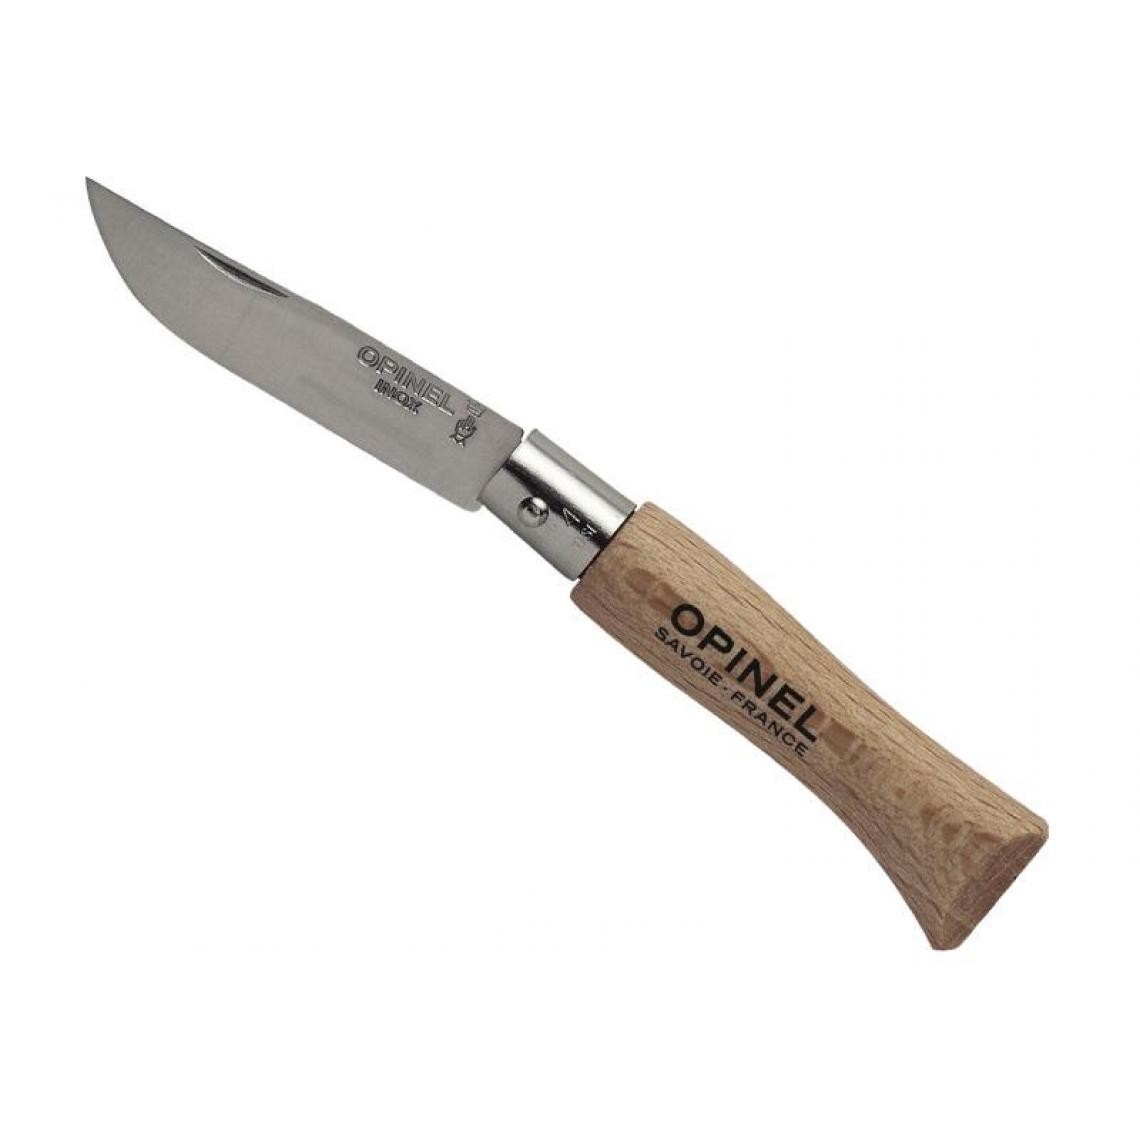 Opinel - OPINEL - 952.04 - BOITE 12 OPINEL N.4 INOX - Outils de coupe